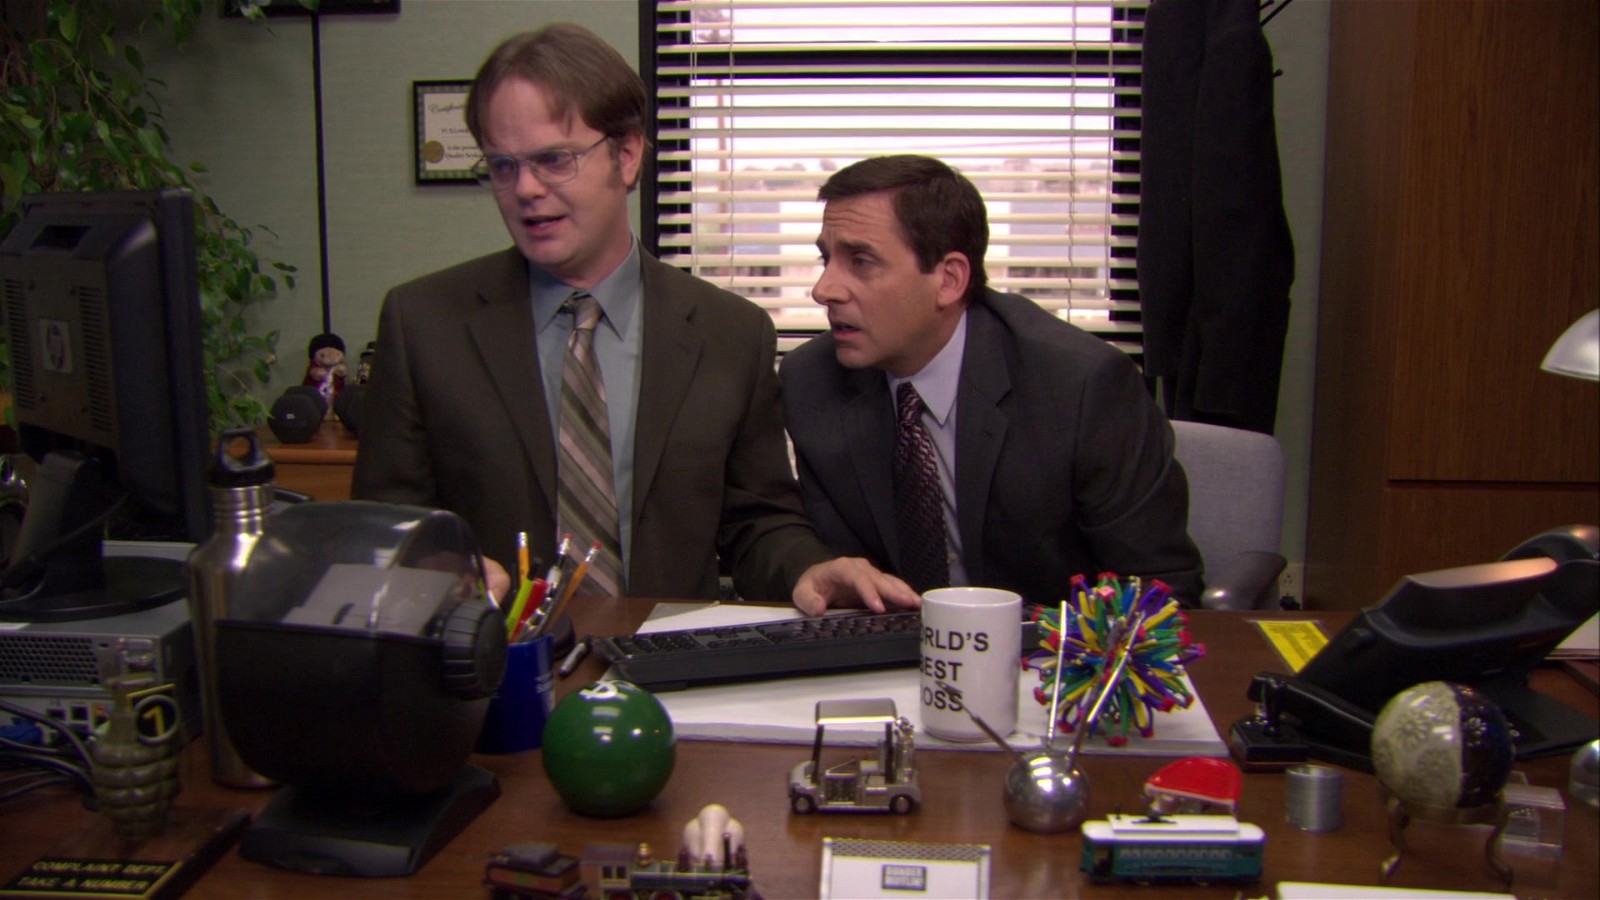 The characters of Michael Scott and Dwight Schrute in a still from The Office